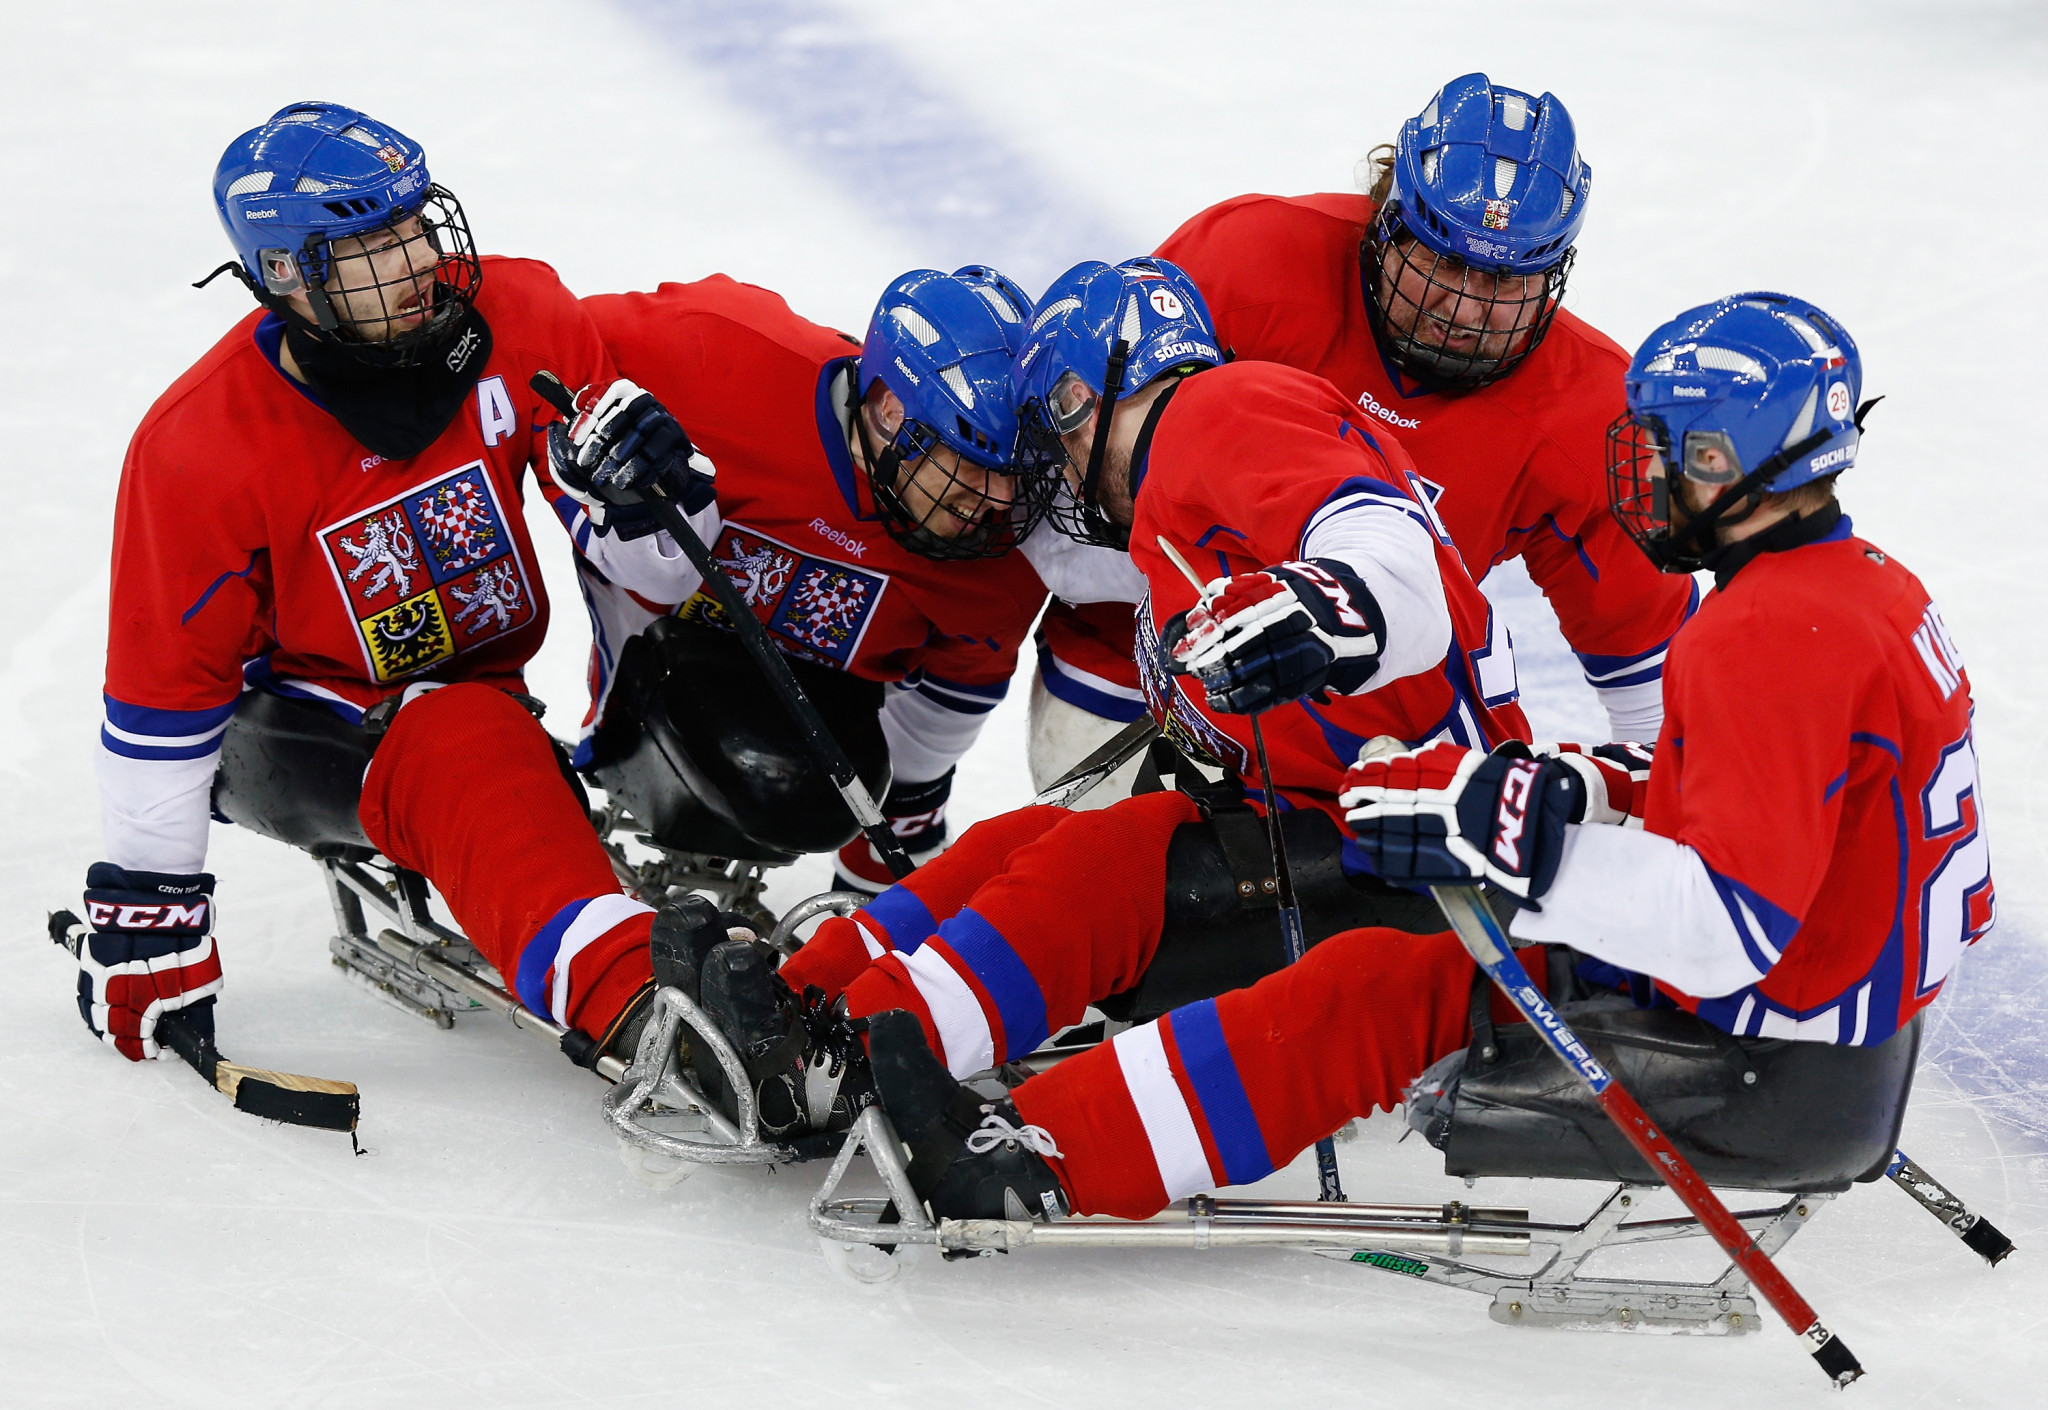 Czech Republic and Japan secure opening wins at World Para Ice Hockey Qualification Tournament 